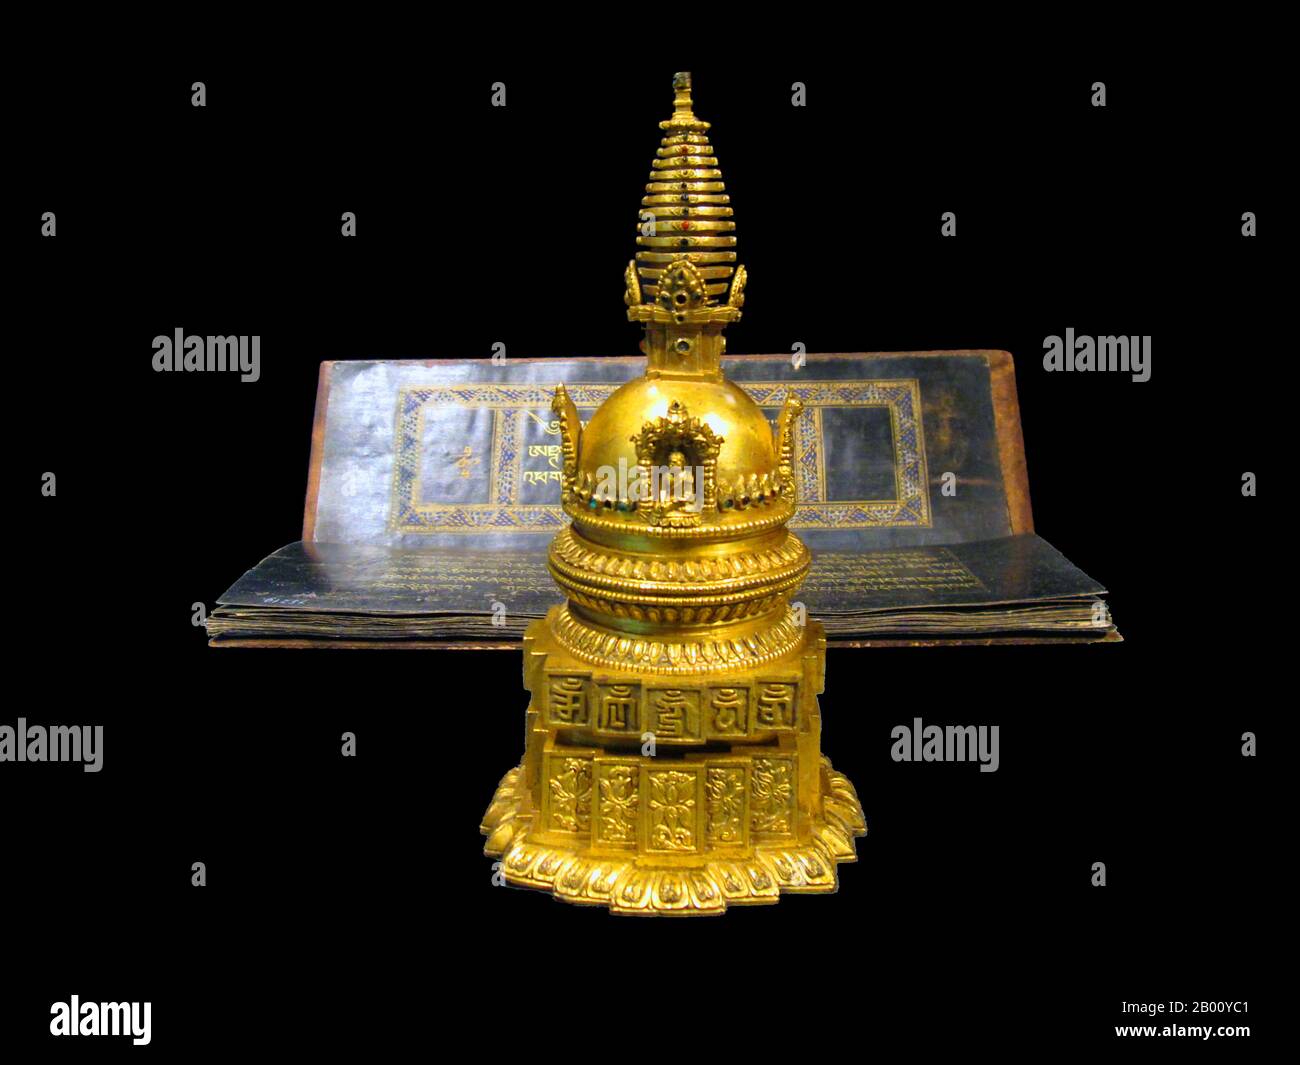 Mongolia: Gilded stupa and a prajnaparamita, Mongolian school, 18th century CE. Photo by Gryffindor (CC BY-SA 3.0 License).  Gilded stupa and a prajnaparamita ('Heart of Perfect Wisdom') text from the 18th century CE. Stock Photo